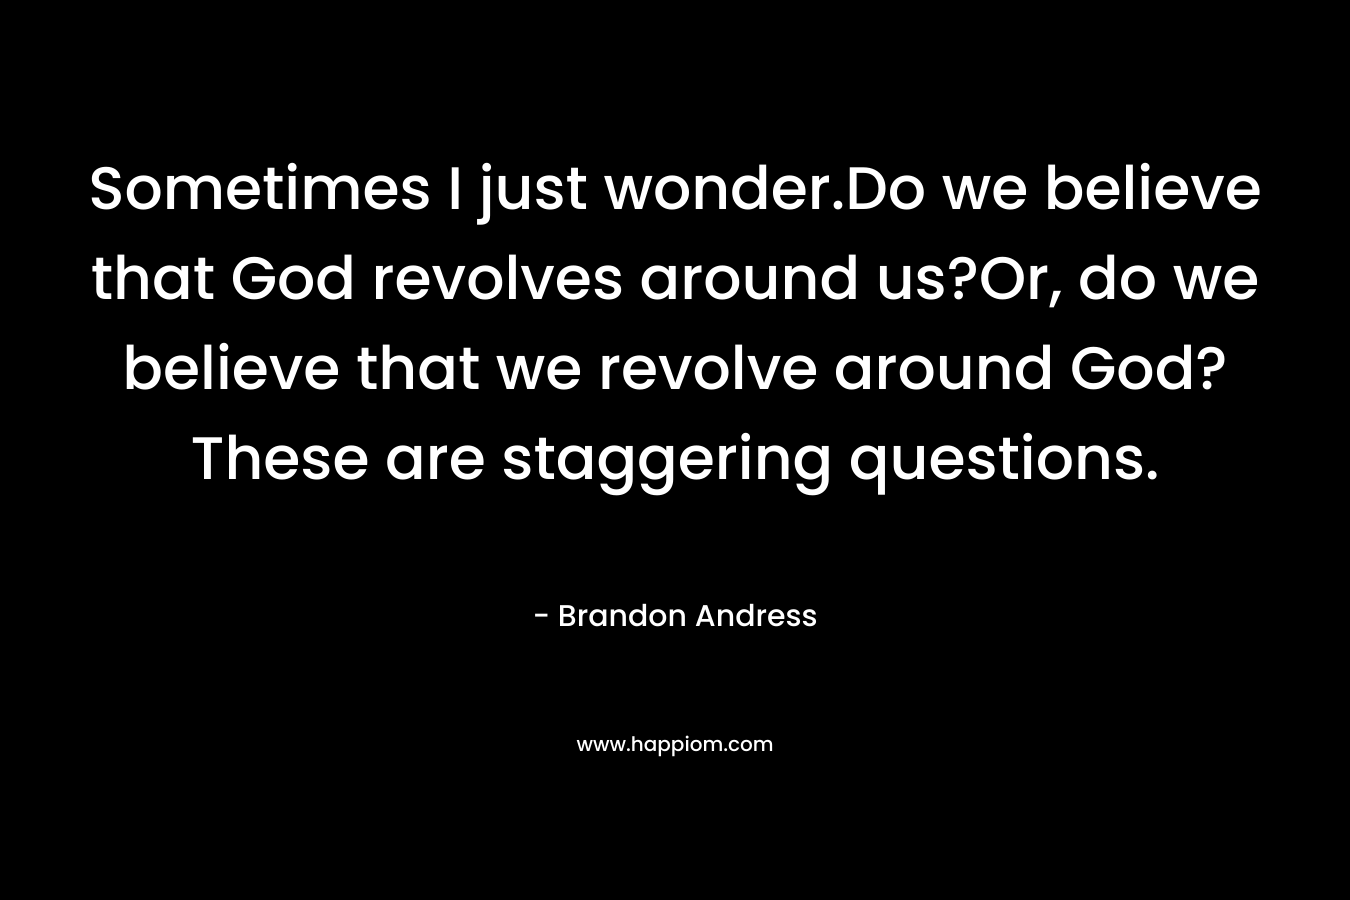 Sometimes I just wonder.Do we believe that God revolves around us?Or, do we believe that we revolve around God?These are staggering questions.